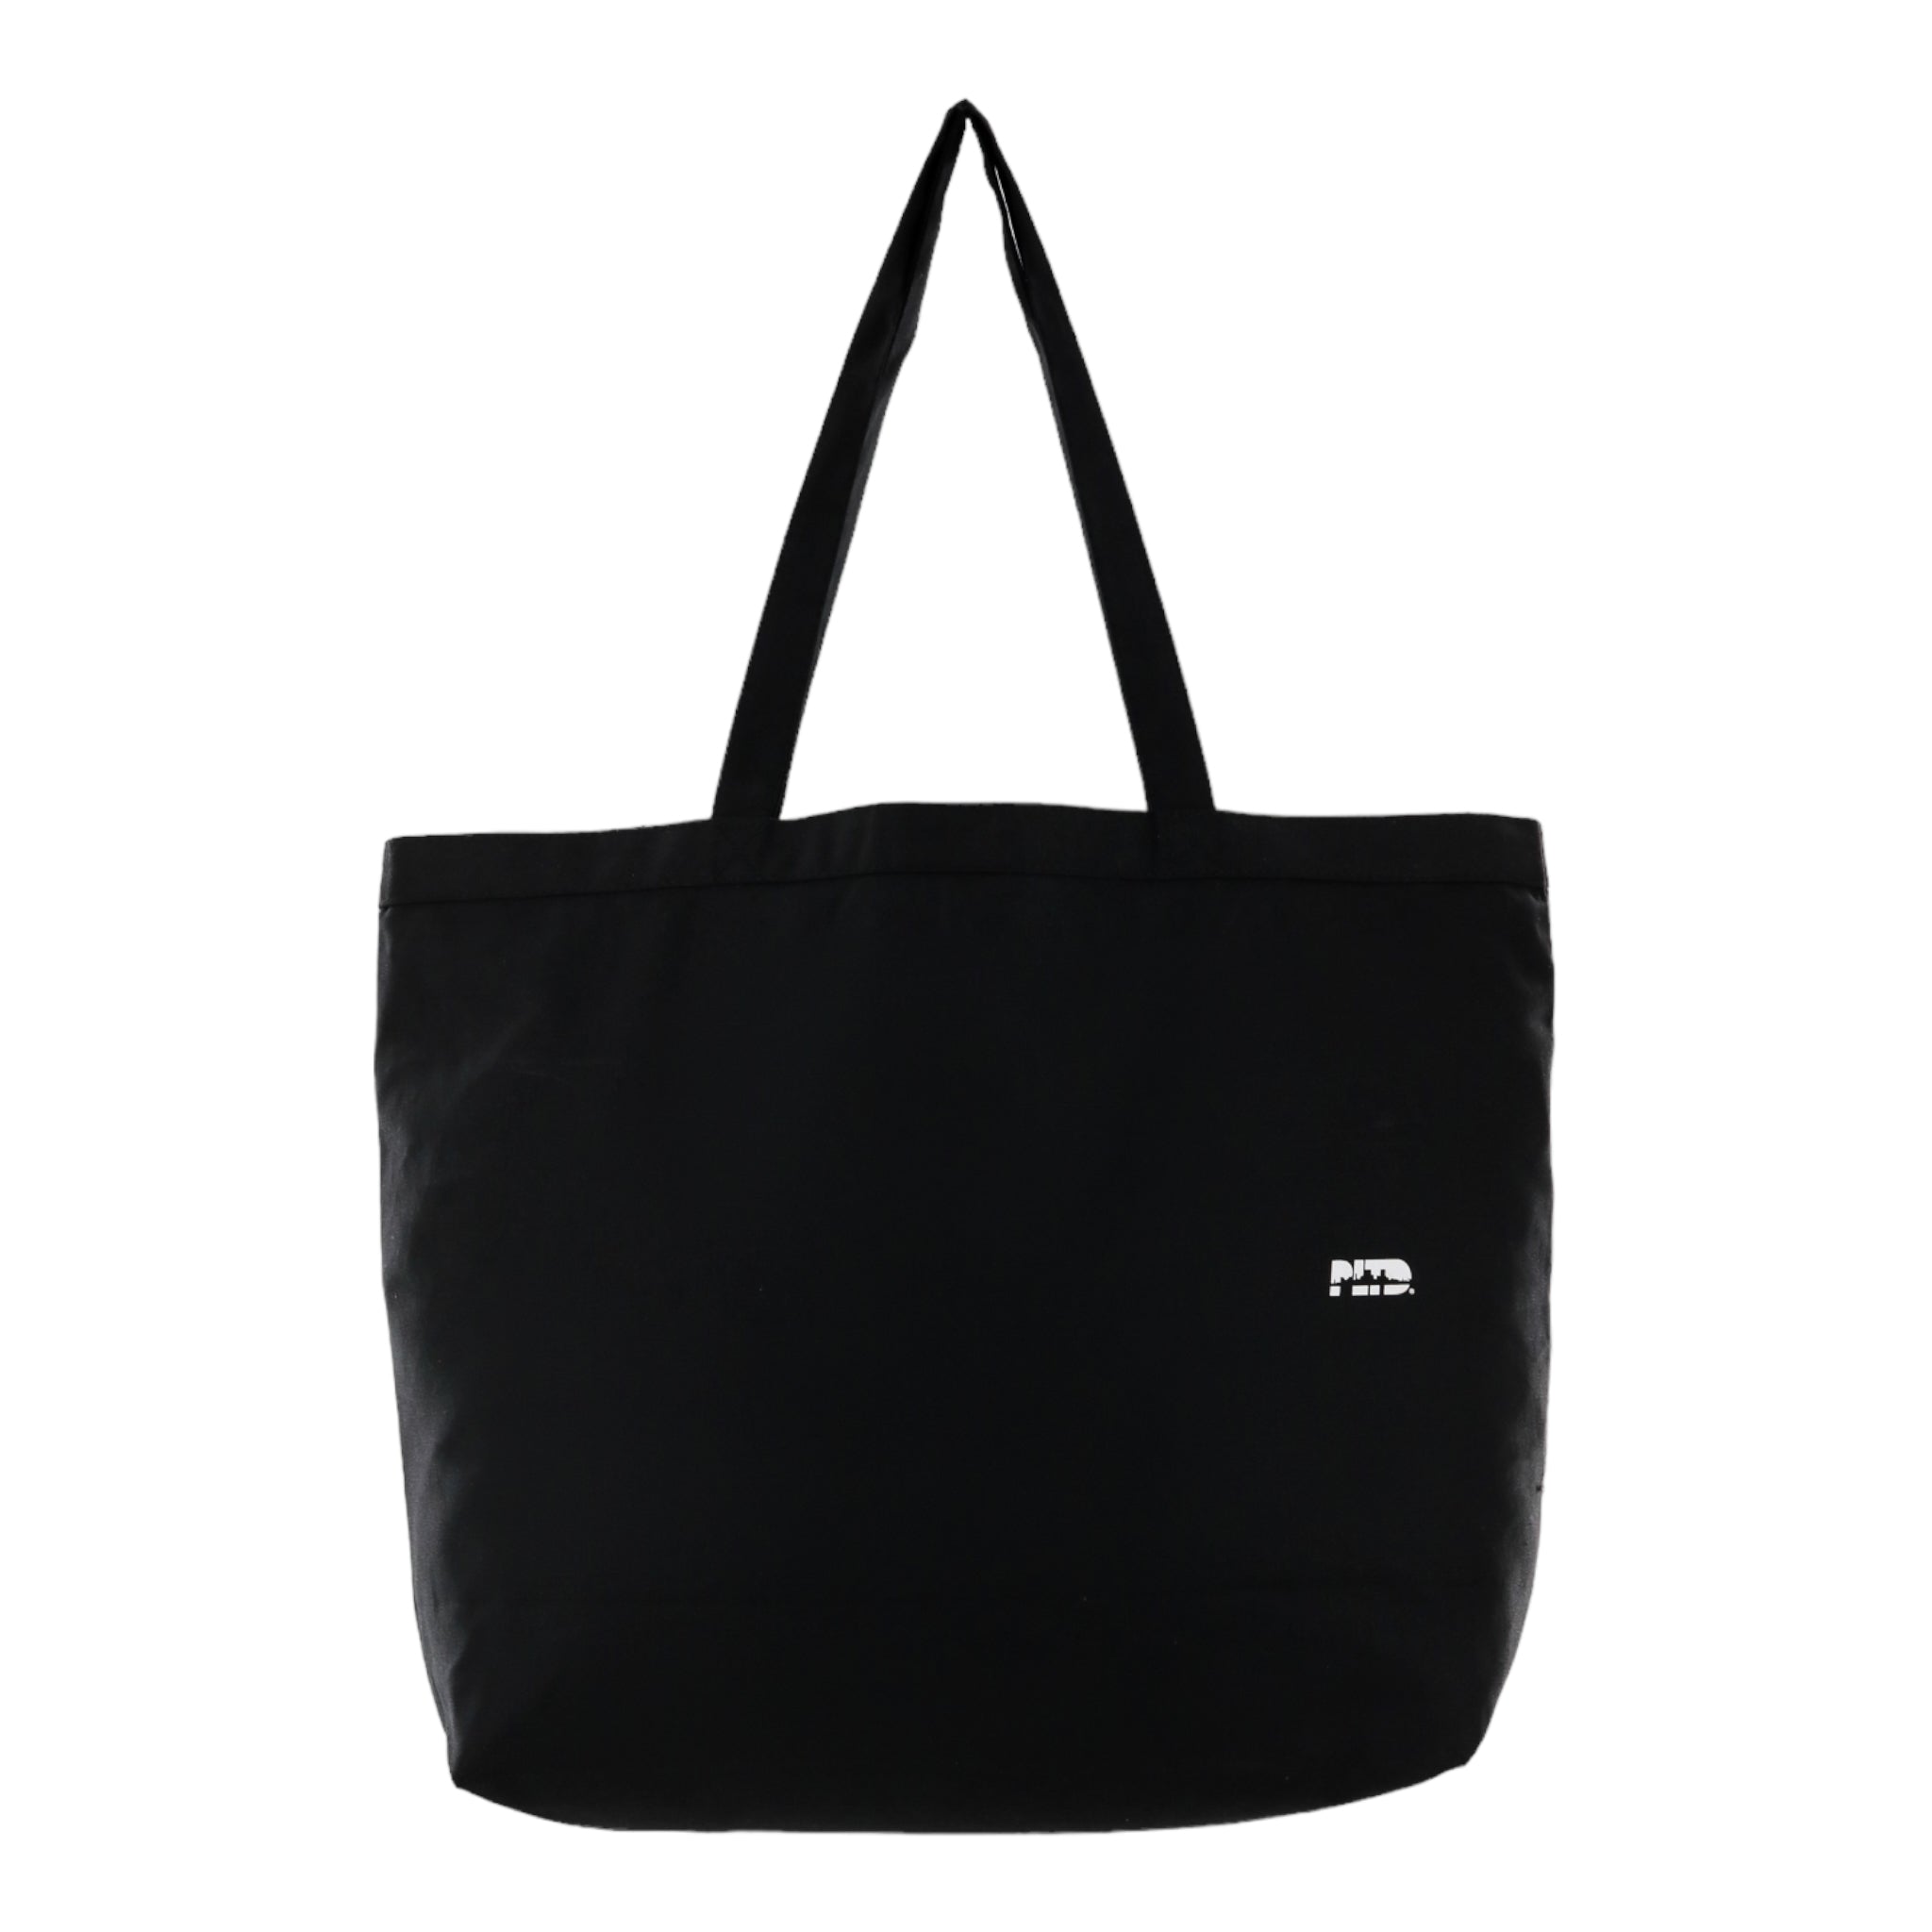 Stay Out of Uptown - Black Canvas Tote Bag